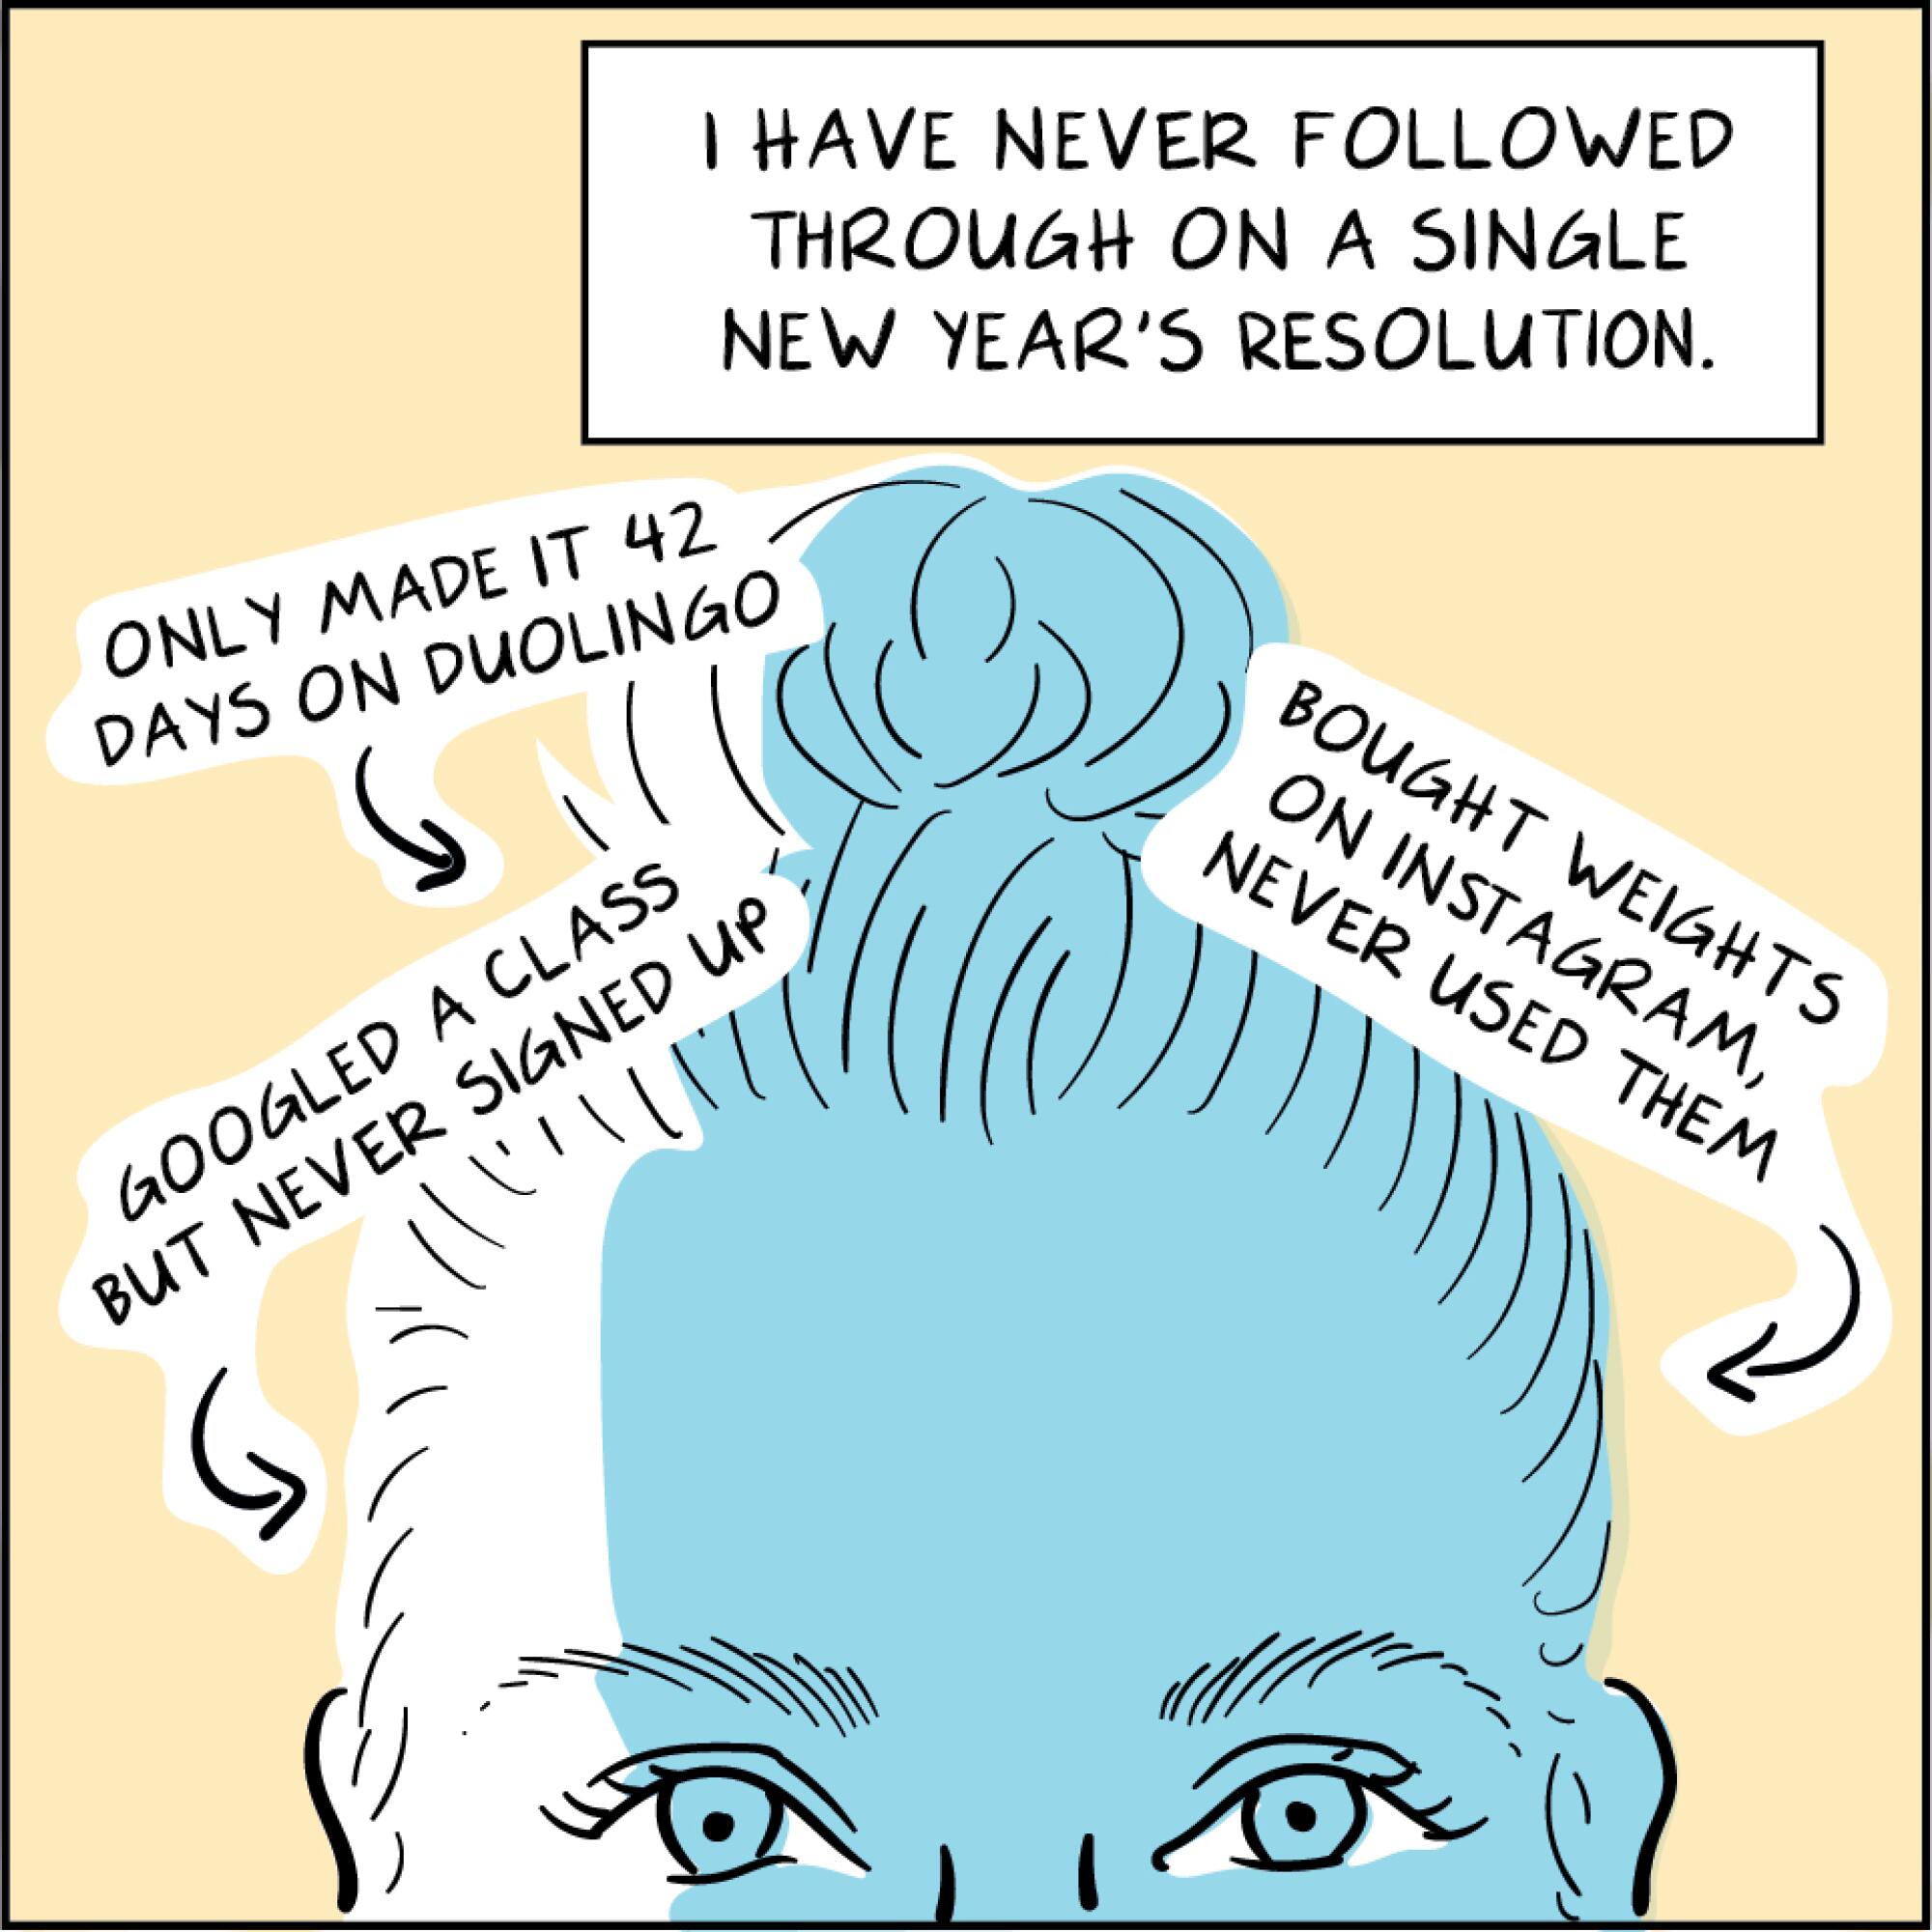 I've never followed through on a single new year's resolution